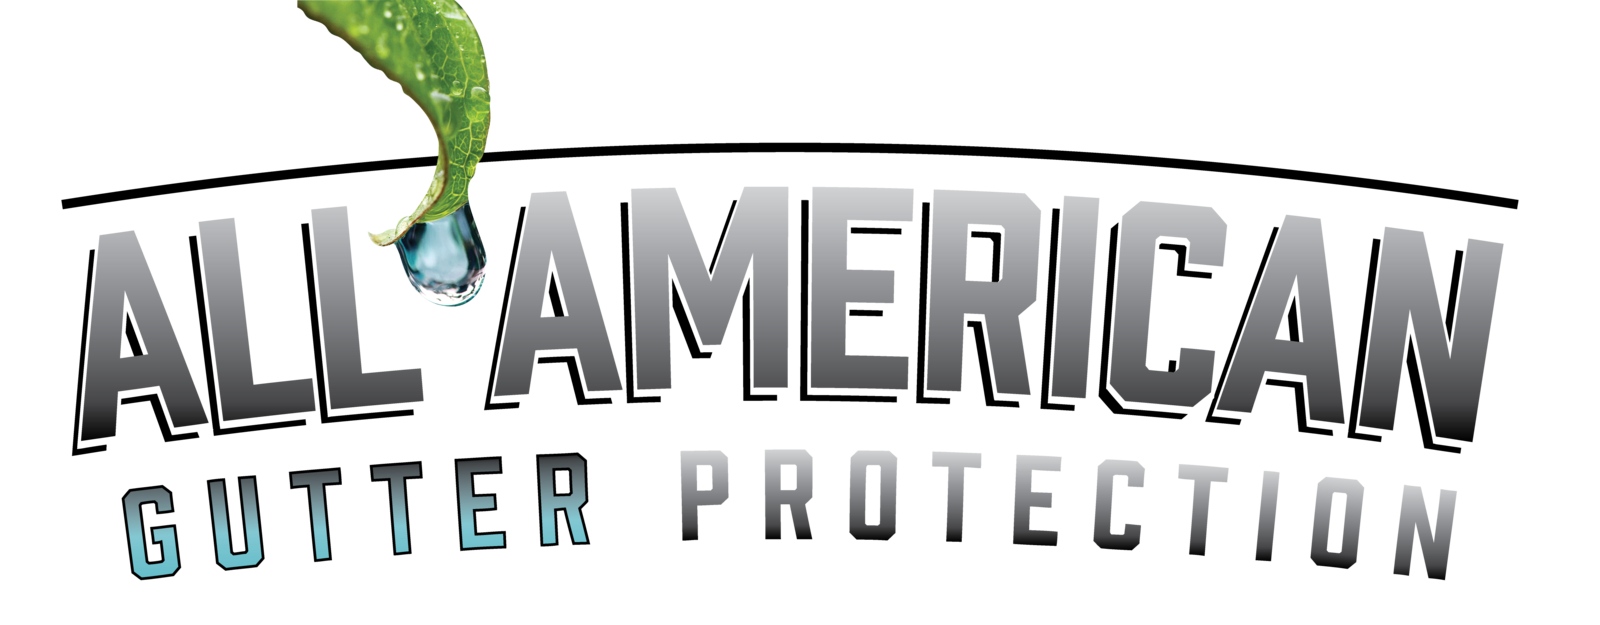 All American Gutter Protection Logo.png